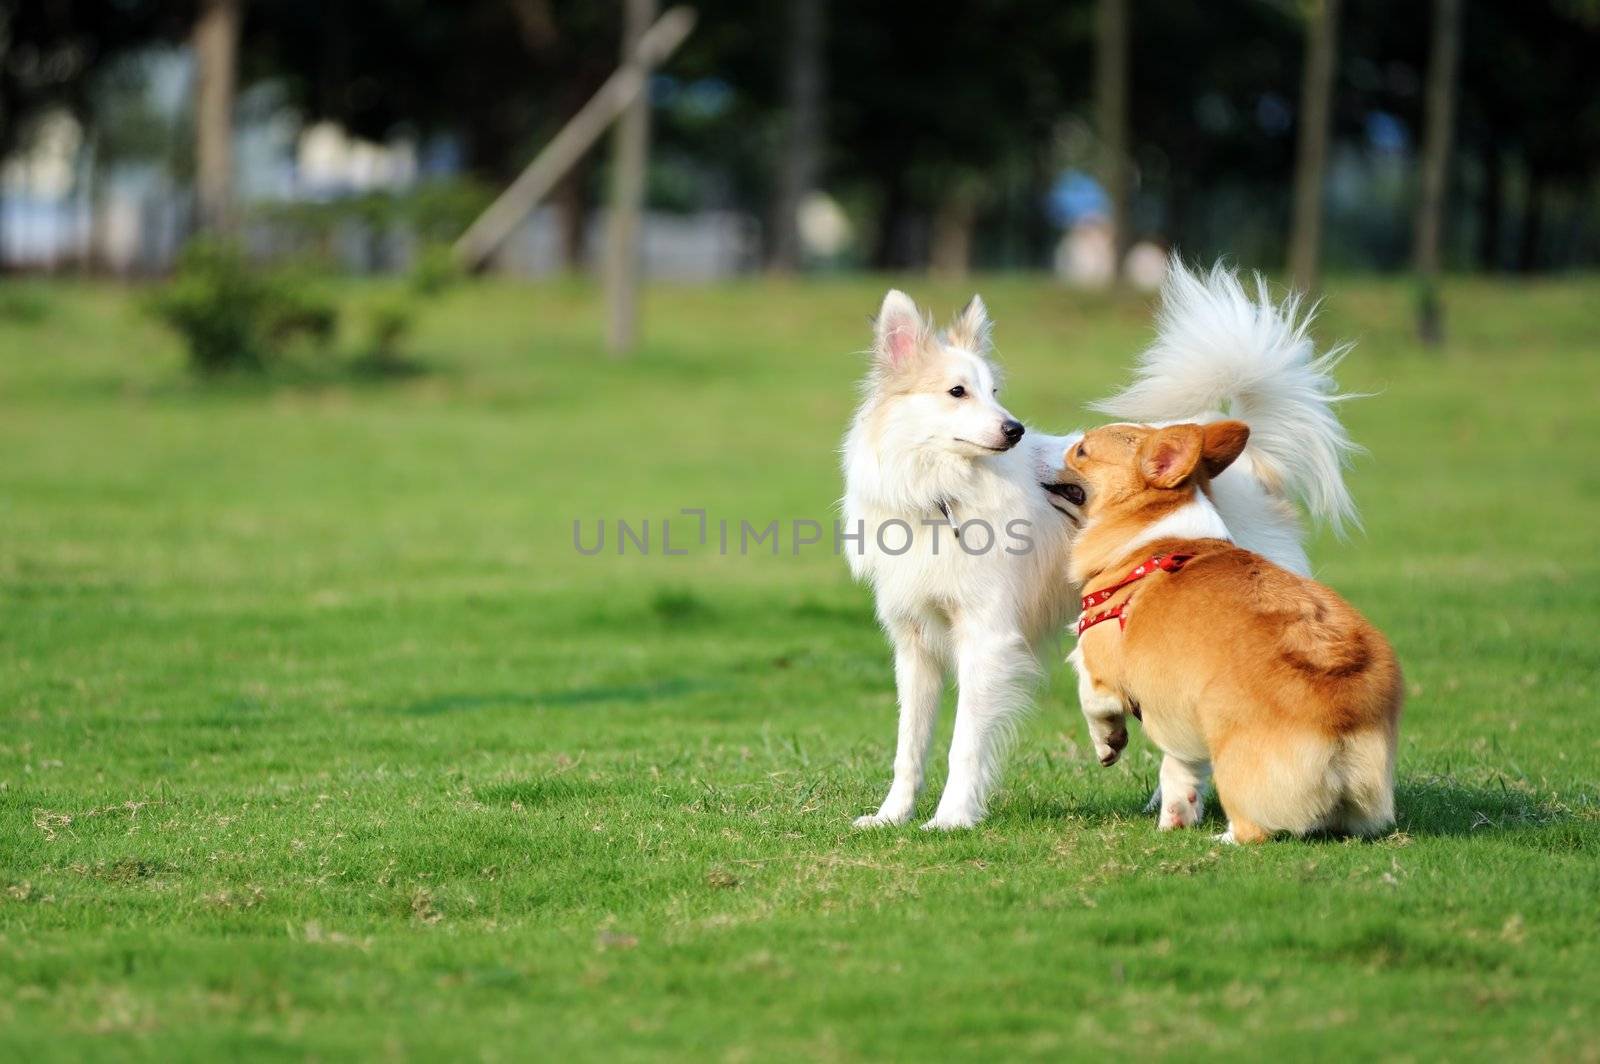 Two dogs playing together on the lawn